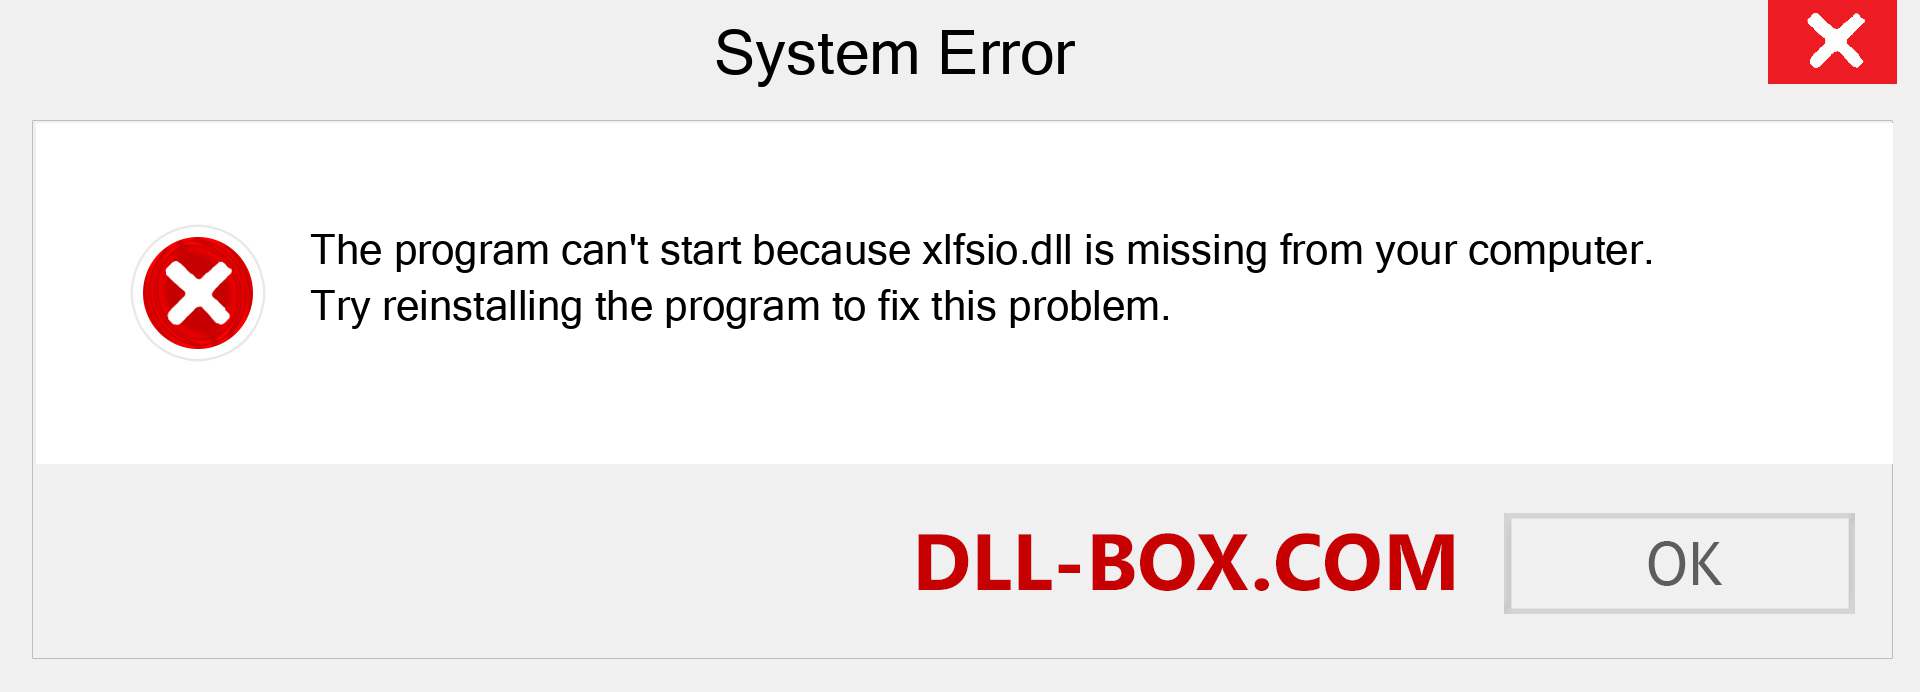  xlfsio.dll file is missing?. Download for Windows 7, 8, 10 - Fix  xlfsio dll Missing Error on Windows, photos, images